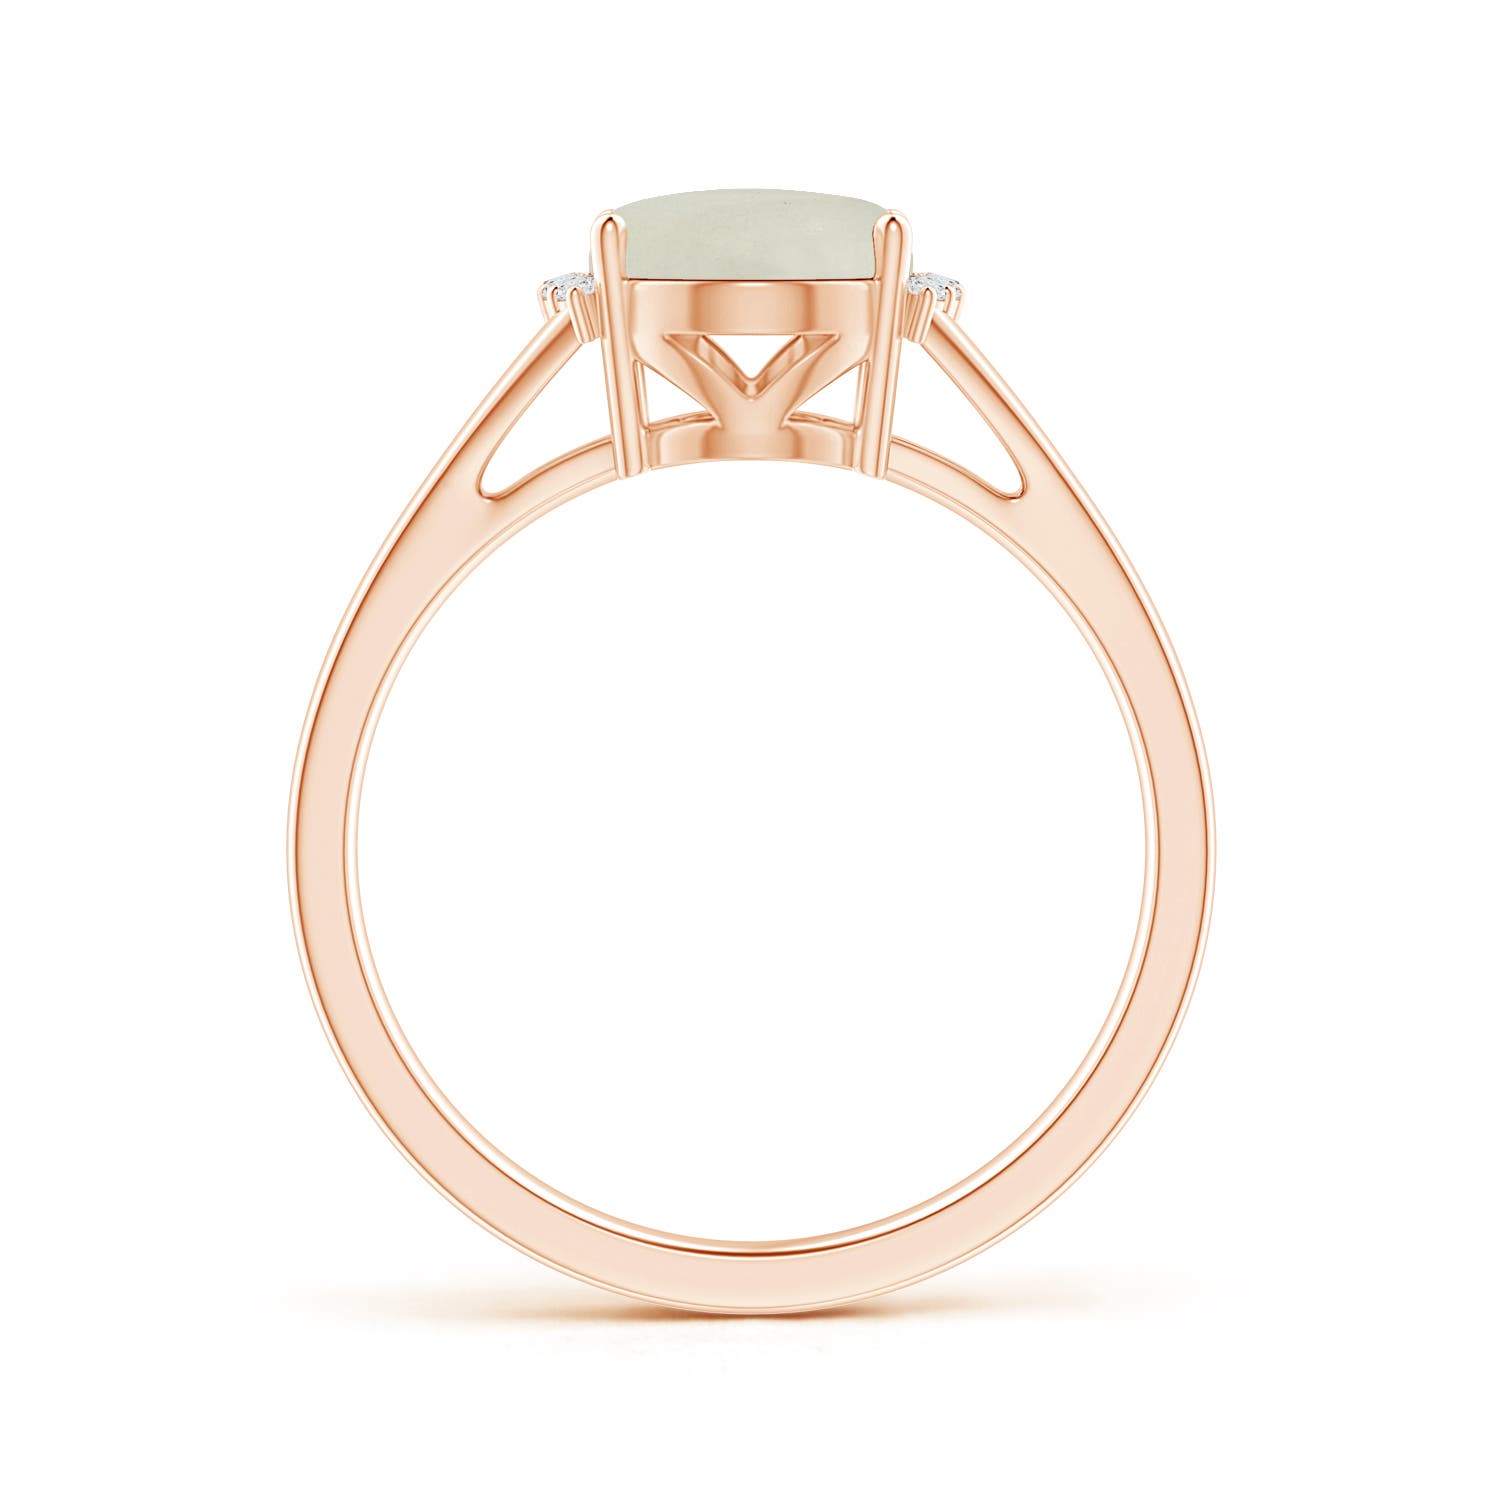 AA - Moonstone / 1.77 CT / 14 KT Rose Gold